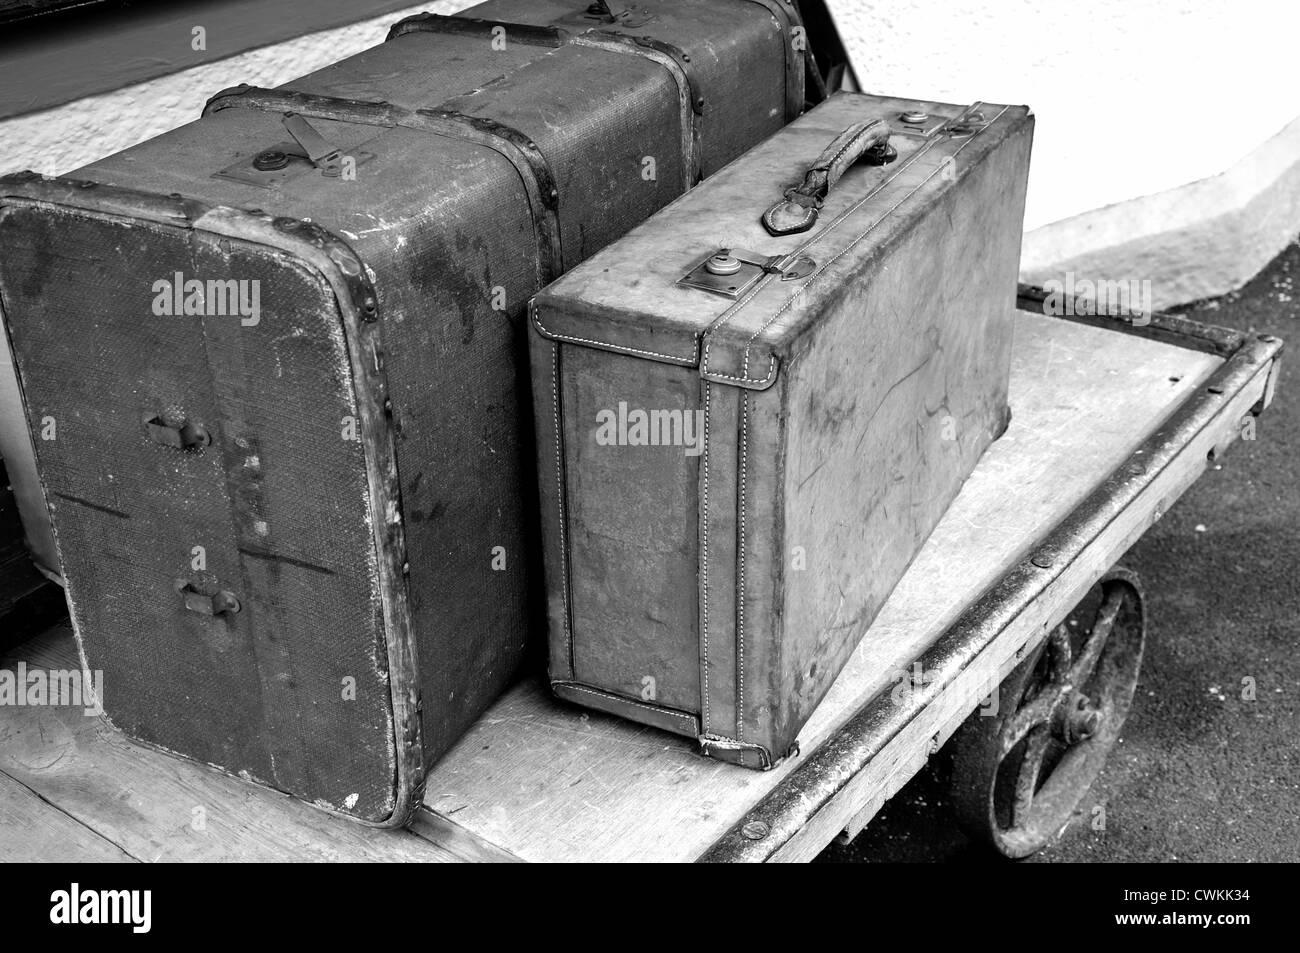 Train station luggage ready to be transported on porters bogie. Stock Photo